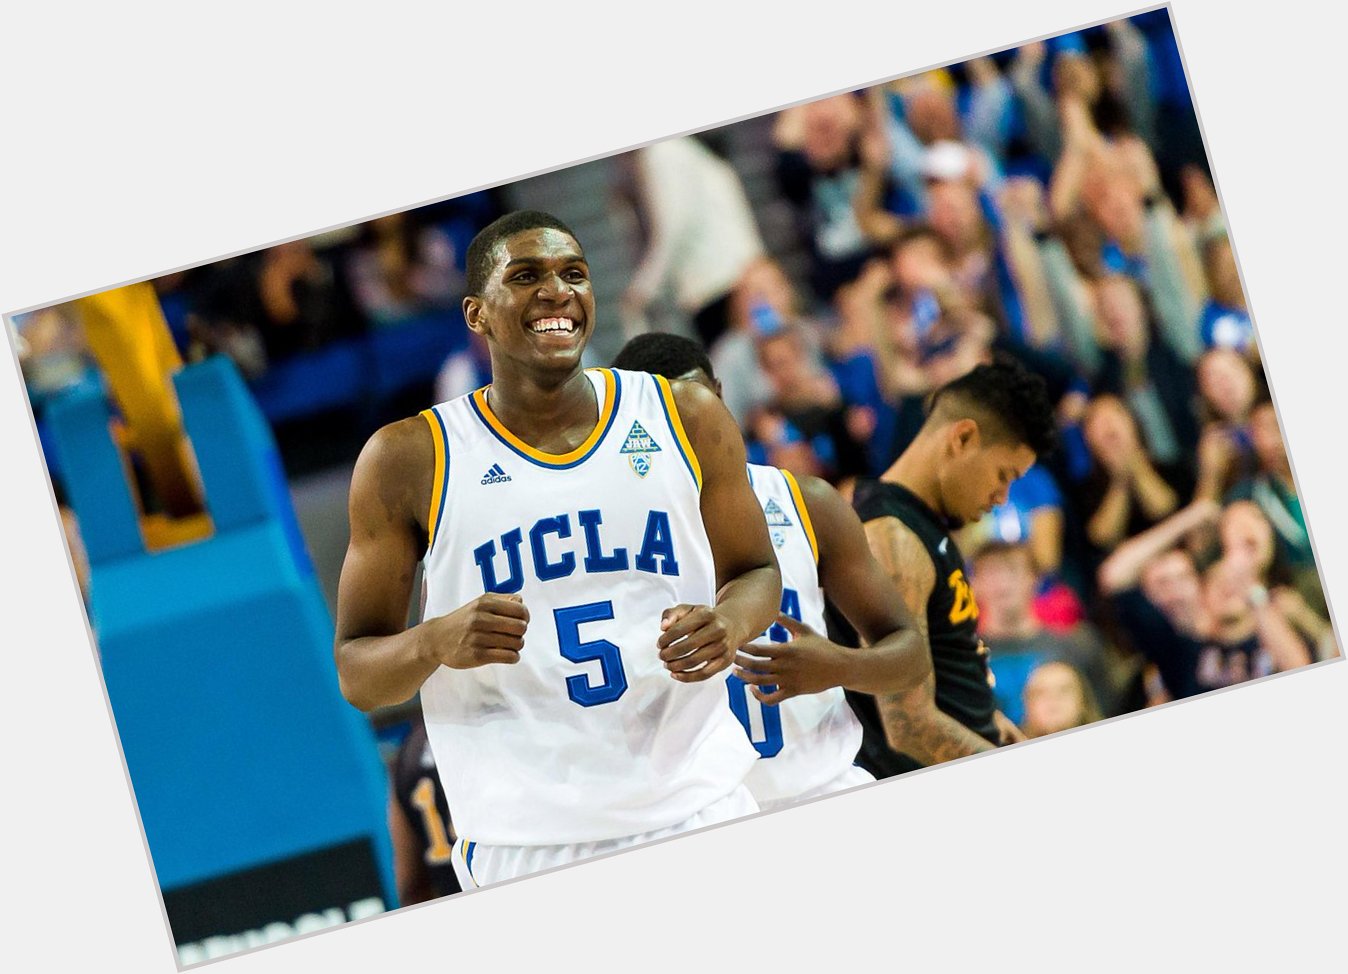  \"We d like to wish a very happy birthday to the freshman Kevon Looney! 